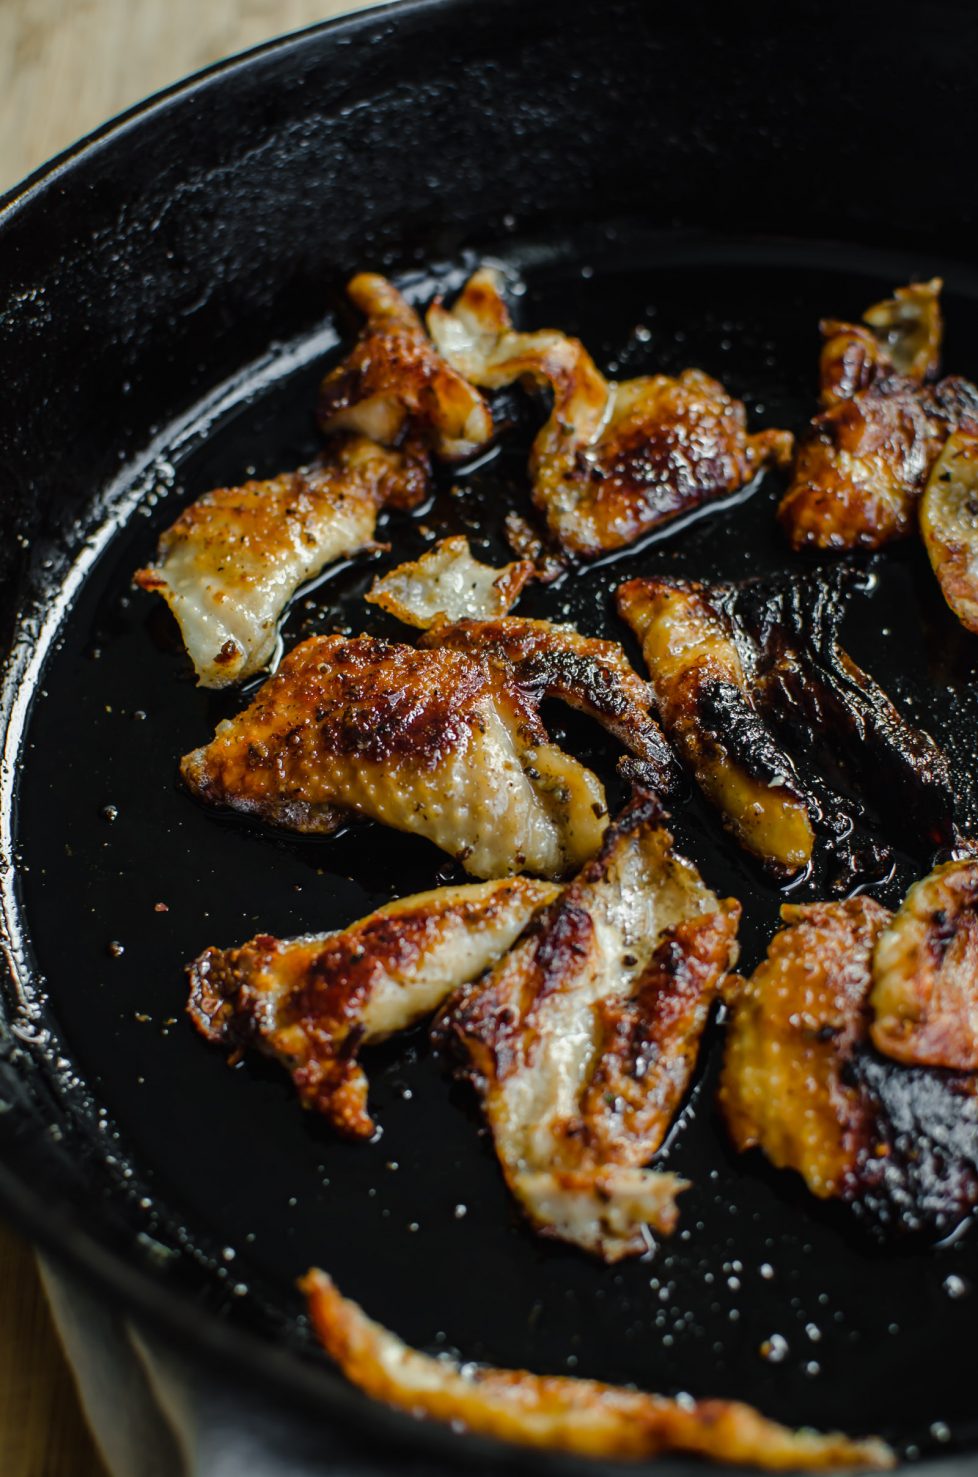 Pieces of turkey skin crisping in a cast iron skillet.